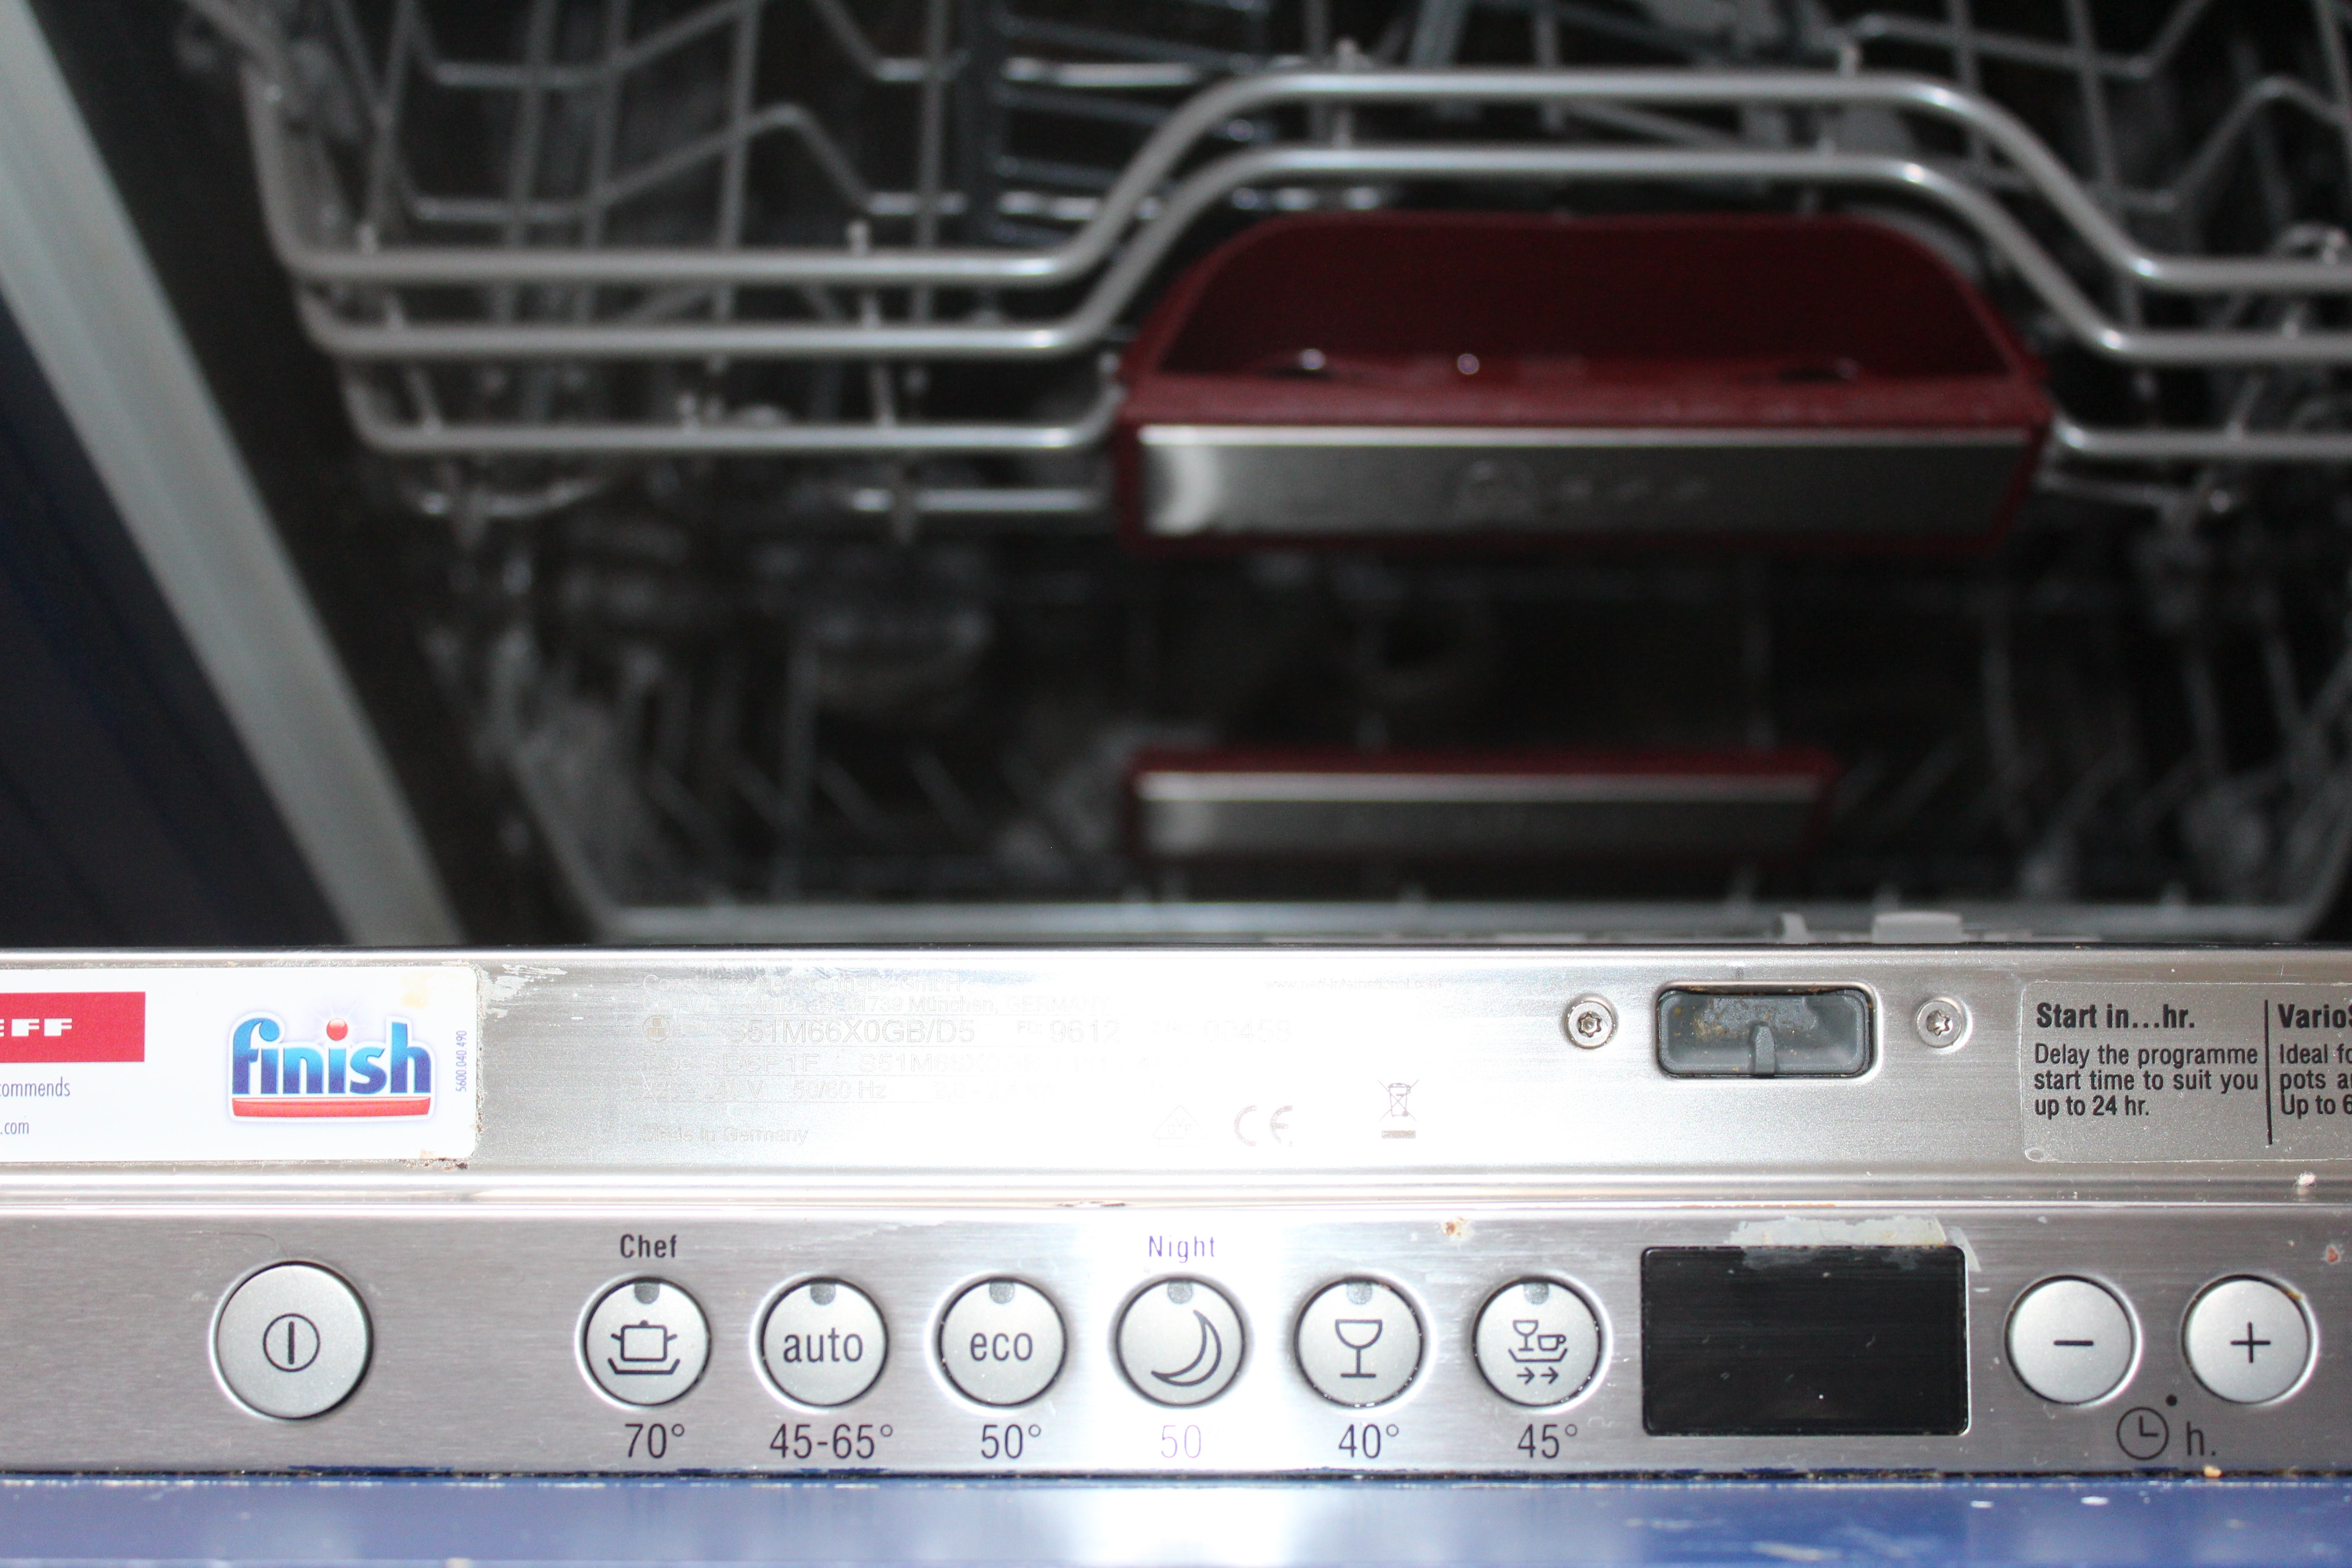 How To Use The Dishwasher How to use a dishwasher | Trusted Reviews